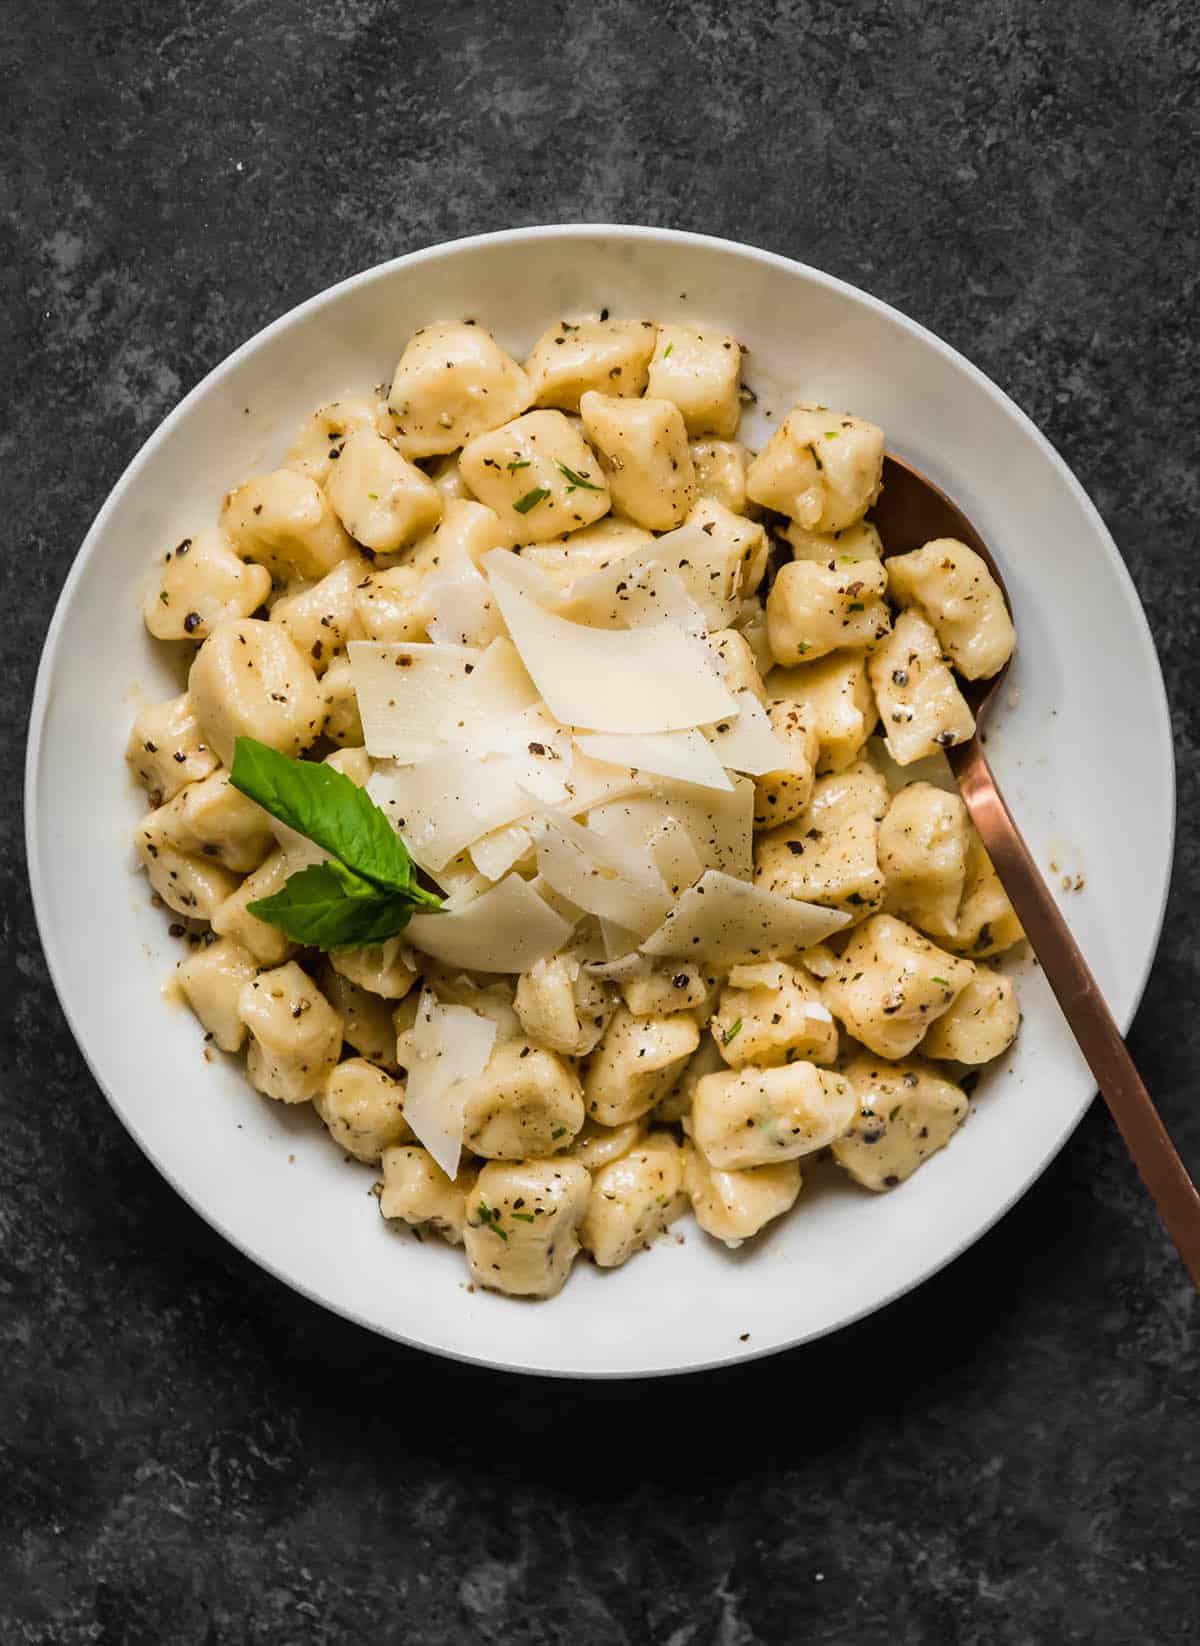 Gnocchi in a shallow white bowl.